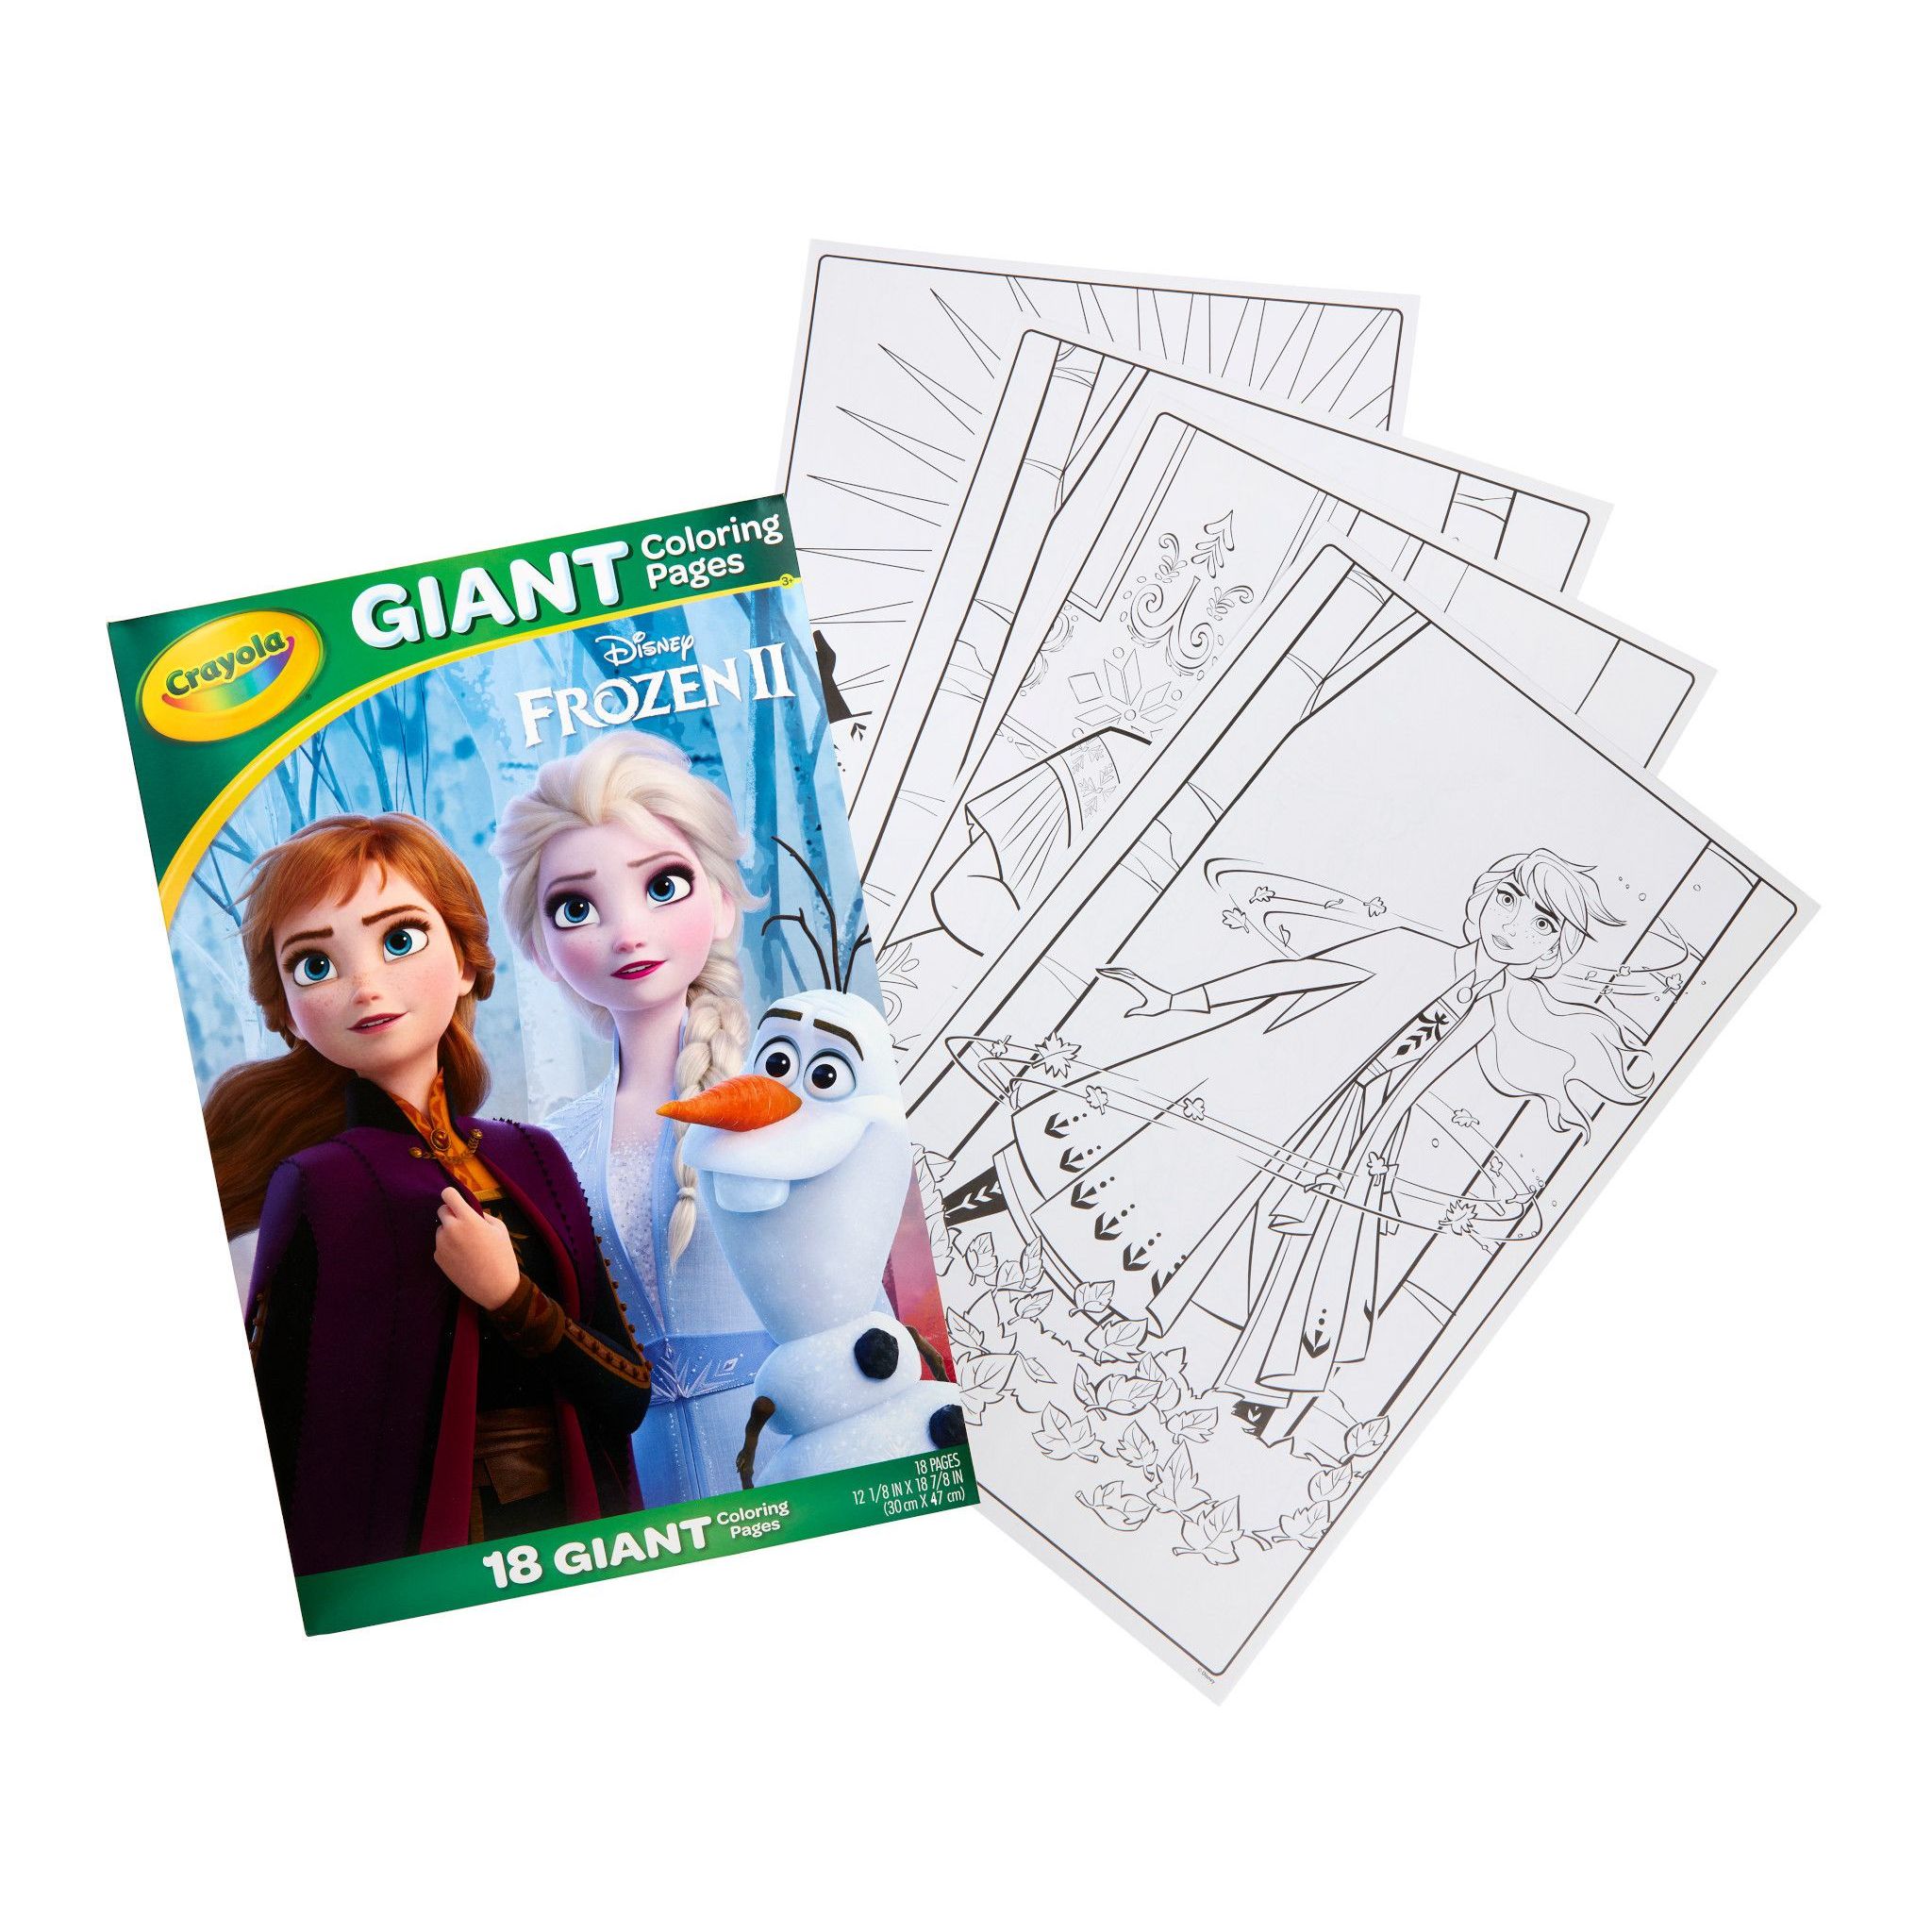 Crayola Giant Coloring Featuring Frozen 2, School Supplies, Child, 18 Pages - image 2 of 5